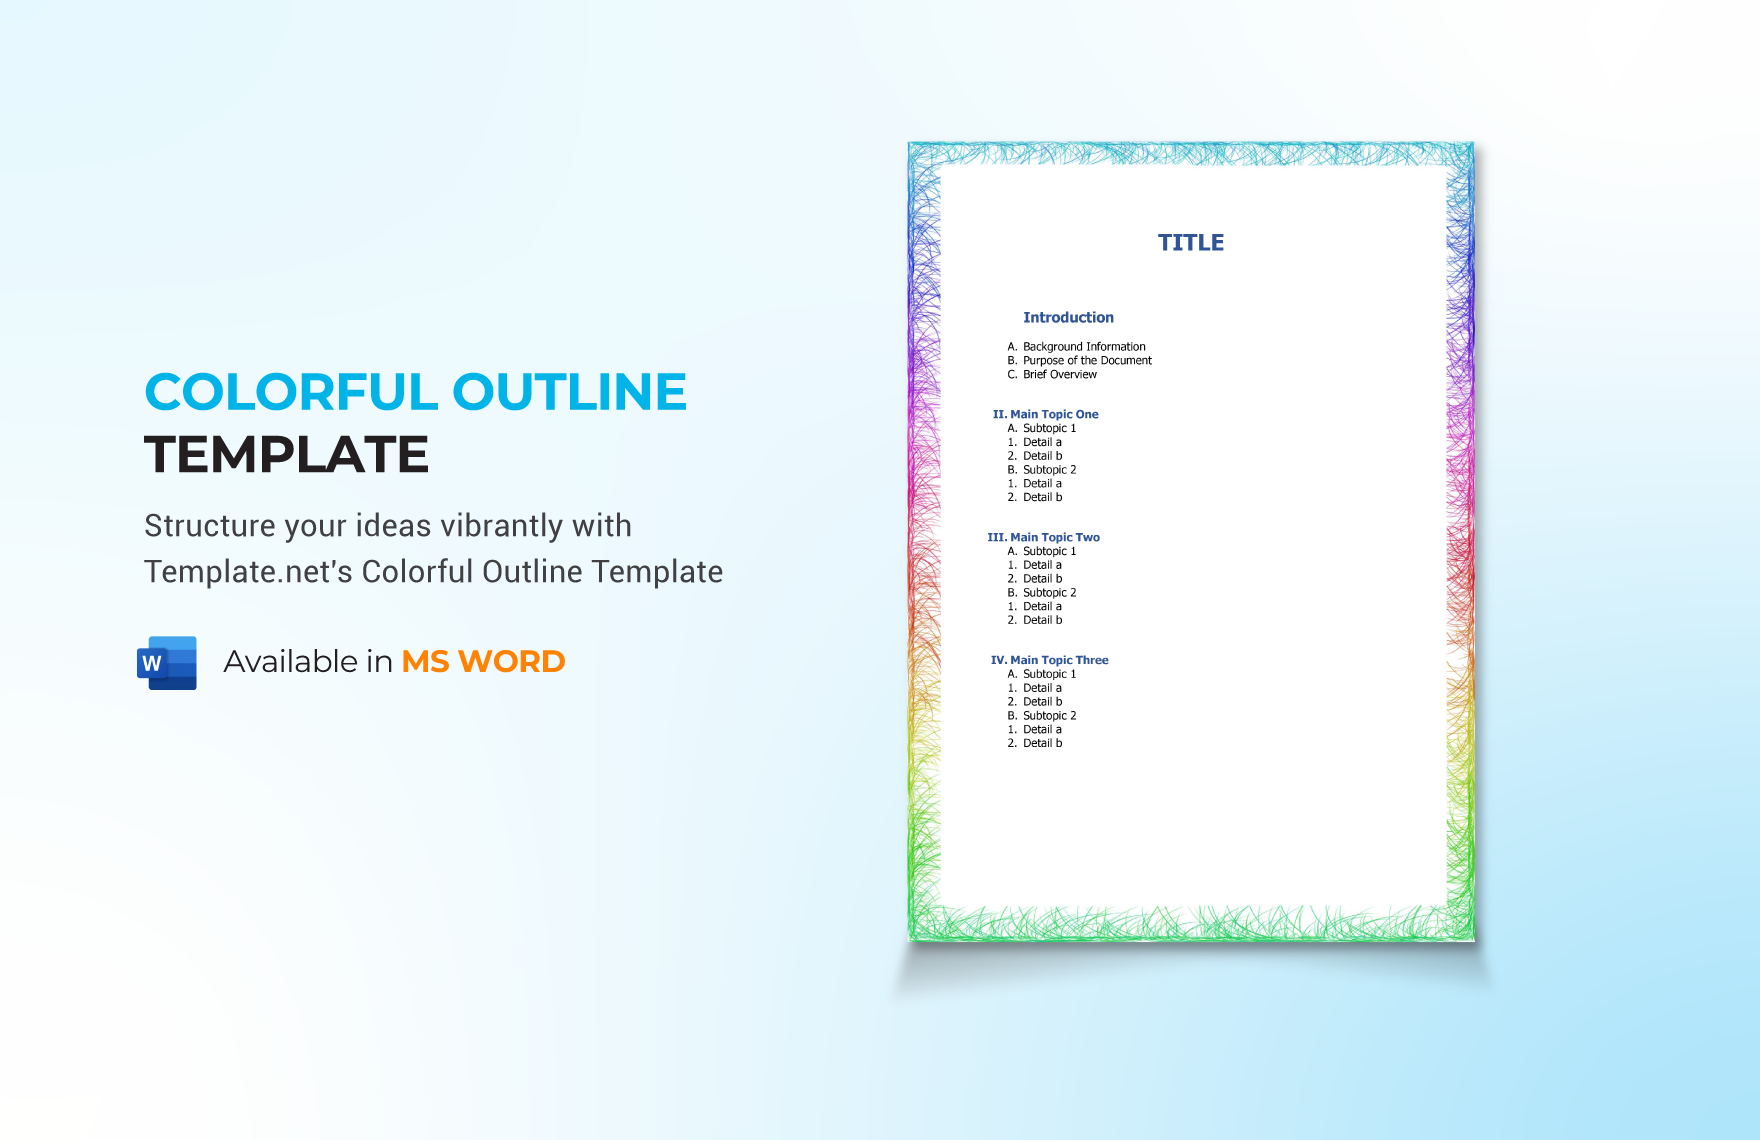 Colorful Outline Template